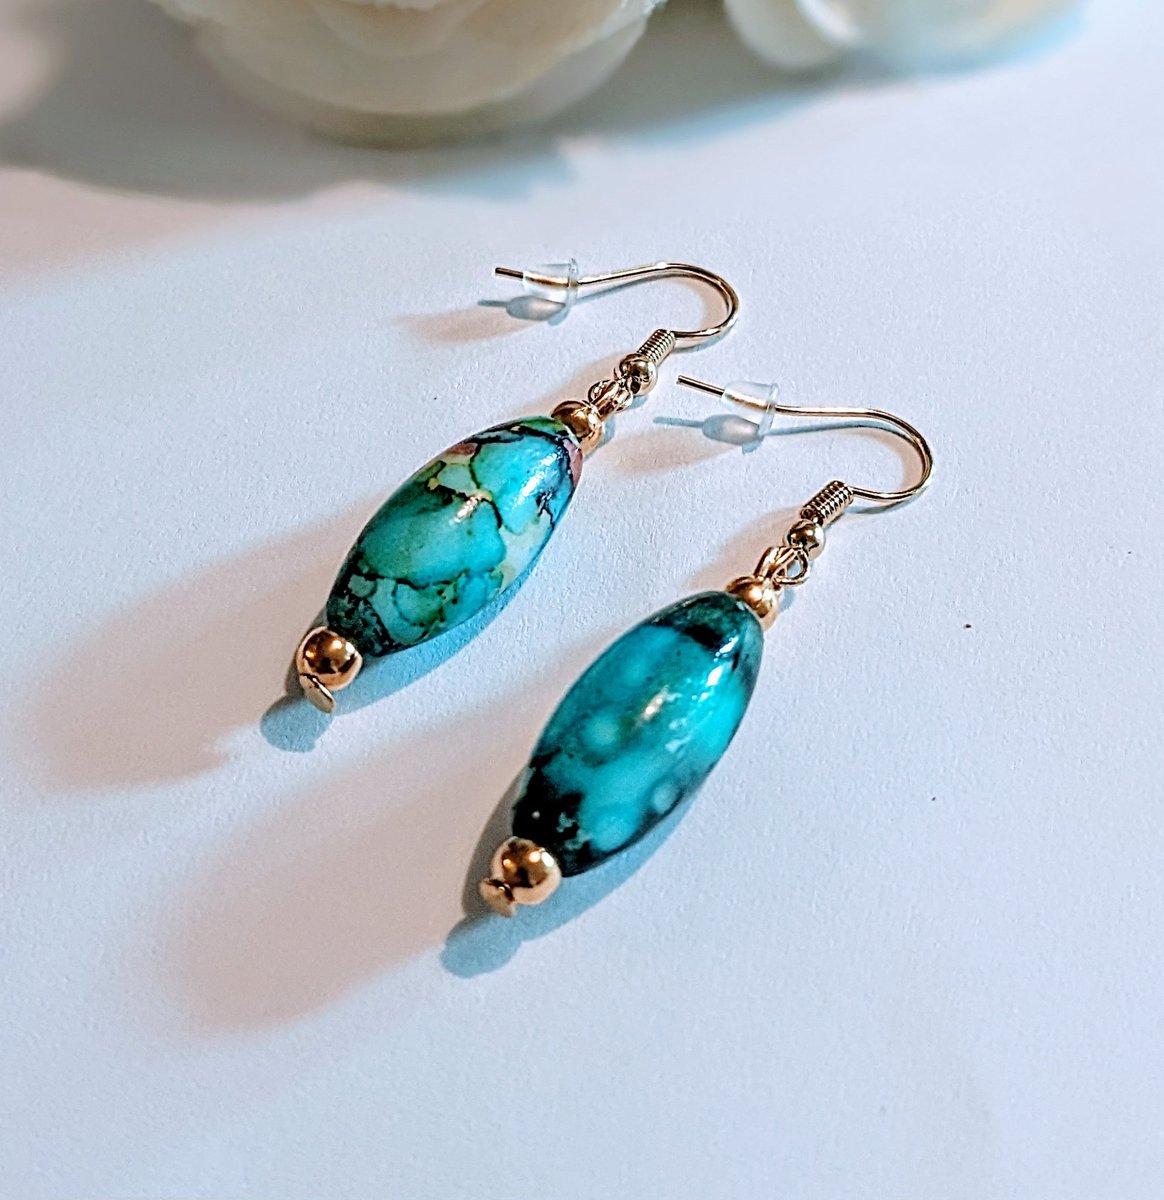 #handmade turquoise marble glass beaded dangle earrings.
18k gold filled.
Other colour options.
Available here ⬇️ 
kelliesuedesigns.etsy.com/listing/126353…
.
#EarlyBiz #EarlyRisers #jewelryaddict #etsy #MHHSBD #giftideas #stockingstuffers #shopping #elevenseshour